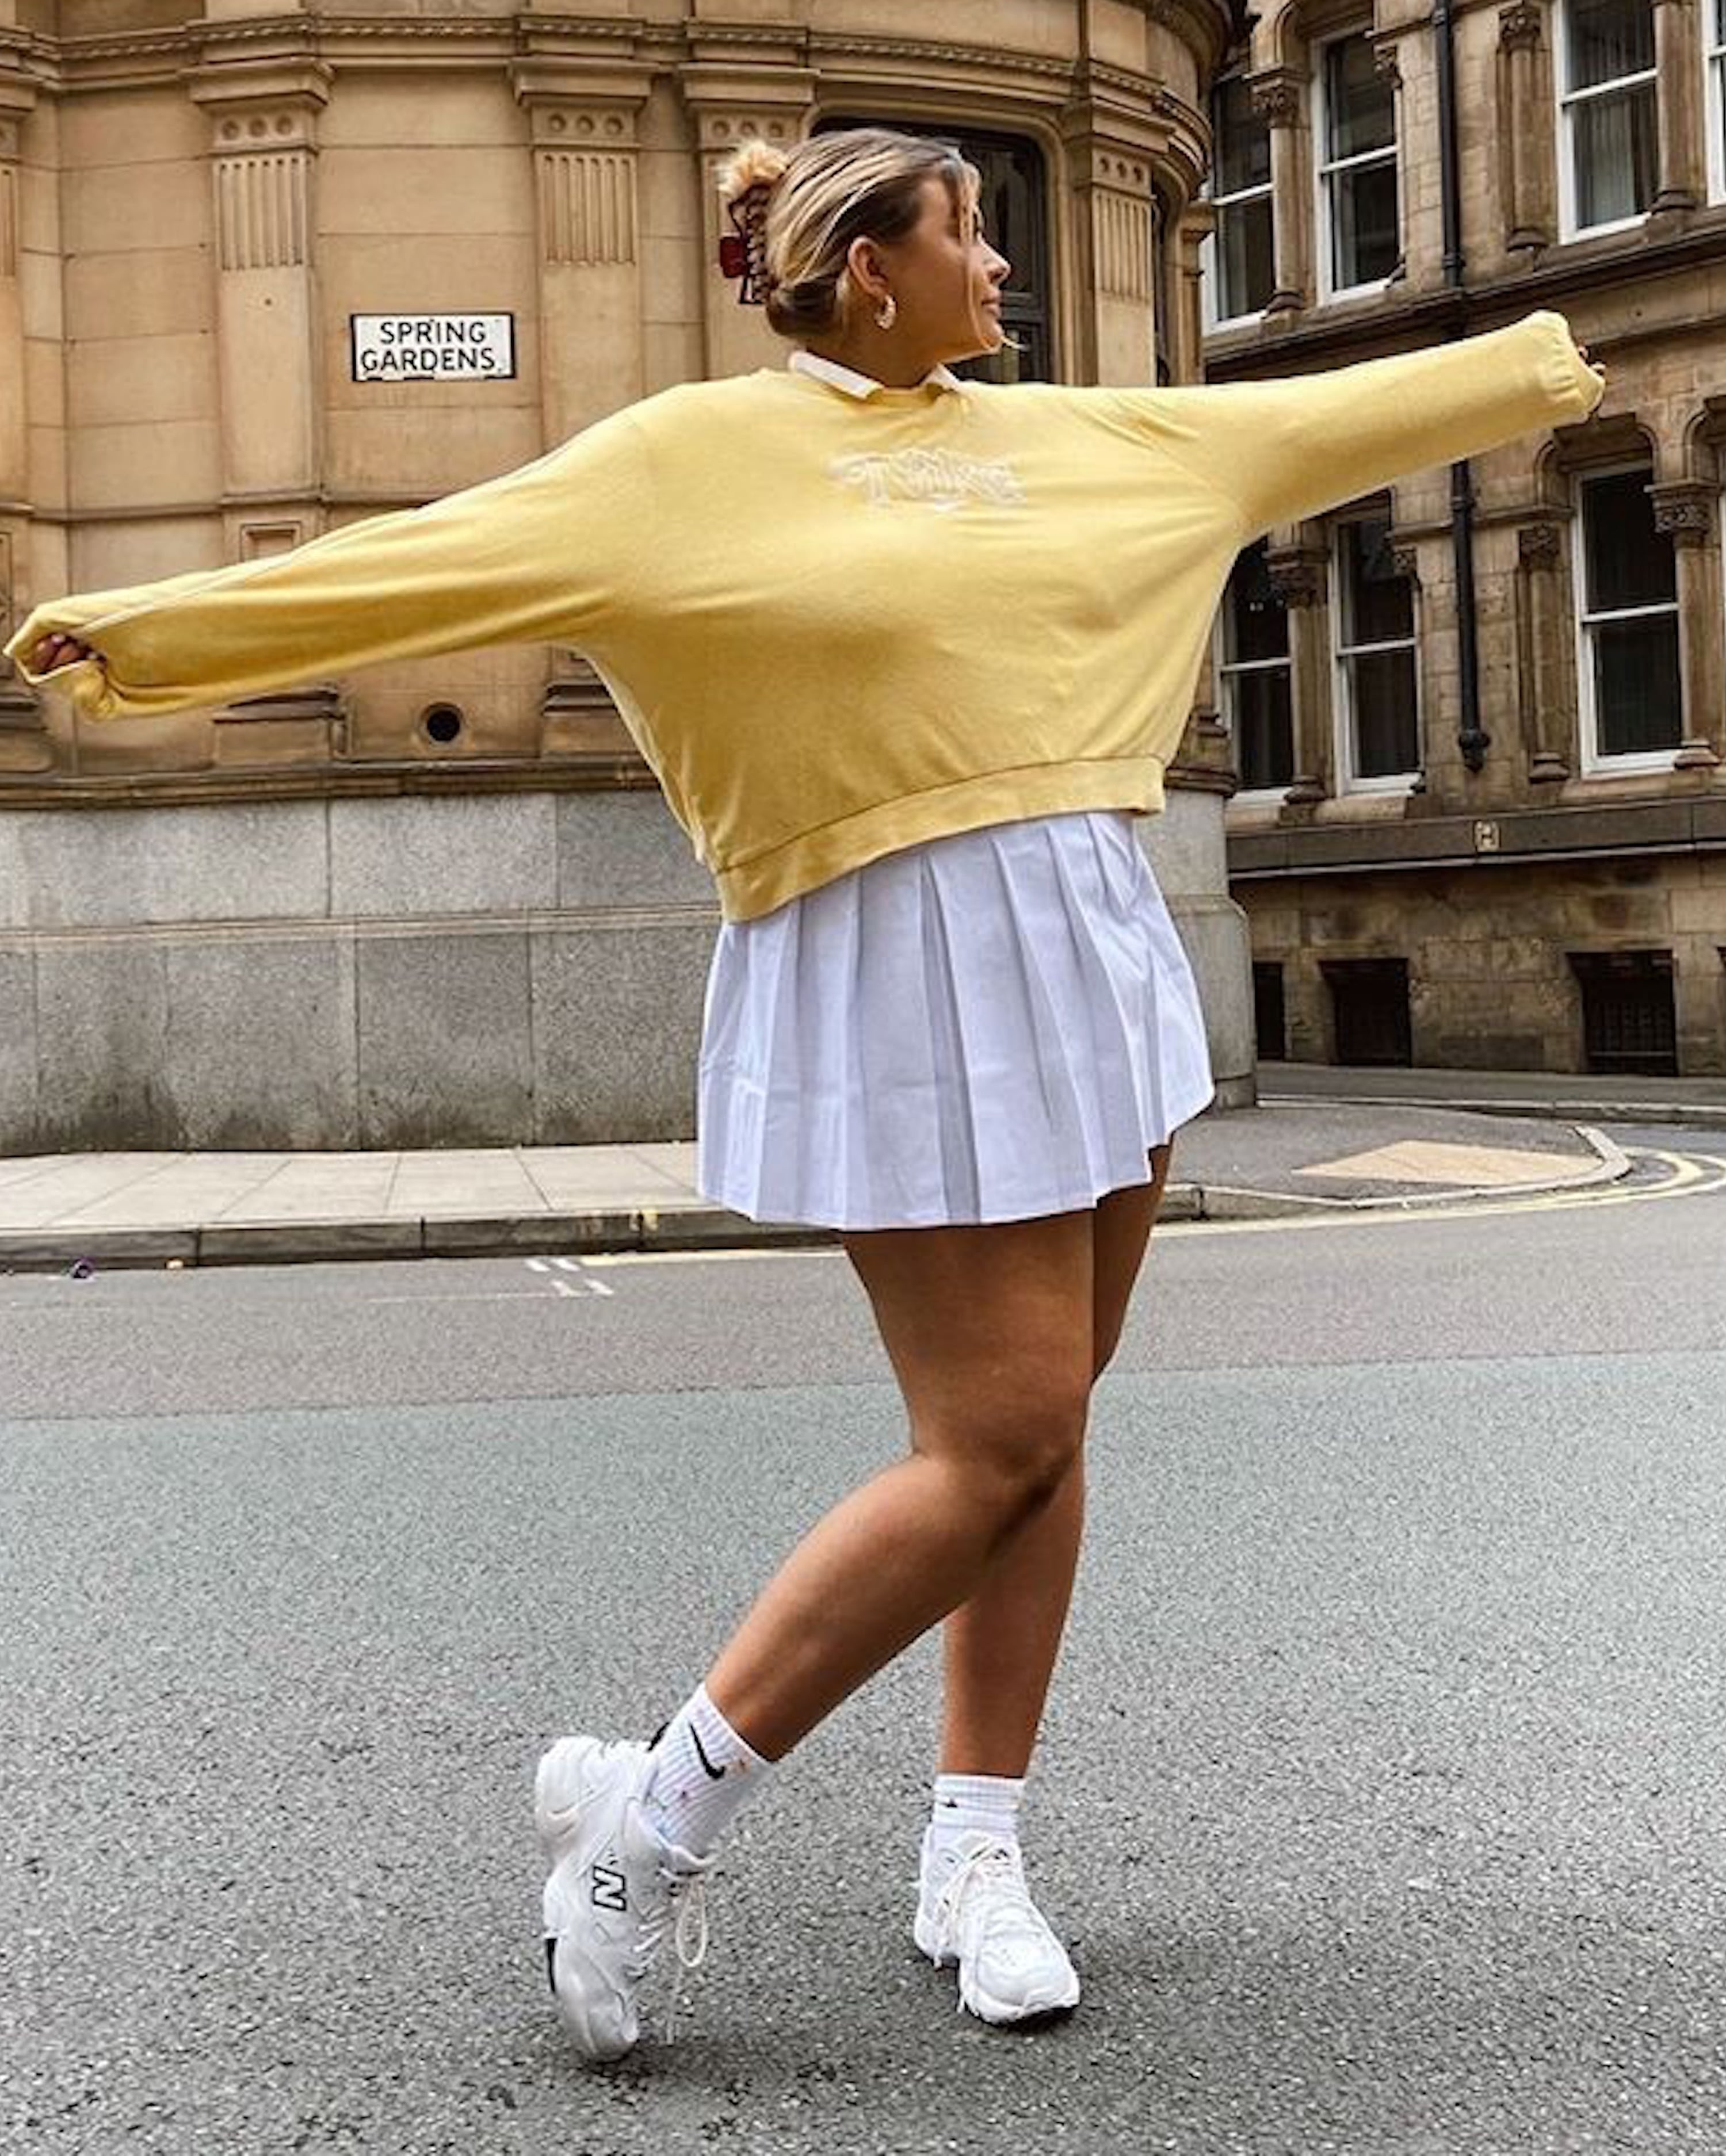 15 WAYS TO WEAR A TENNIS SKIRT  SUMMER AND FALL OUTFIT IDEAS